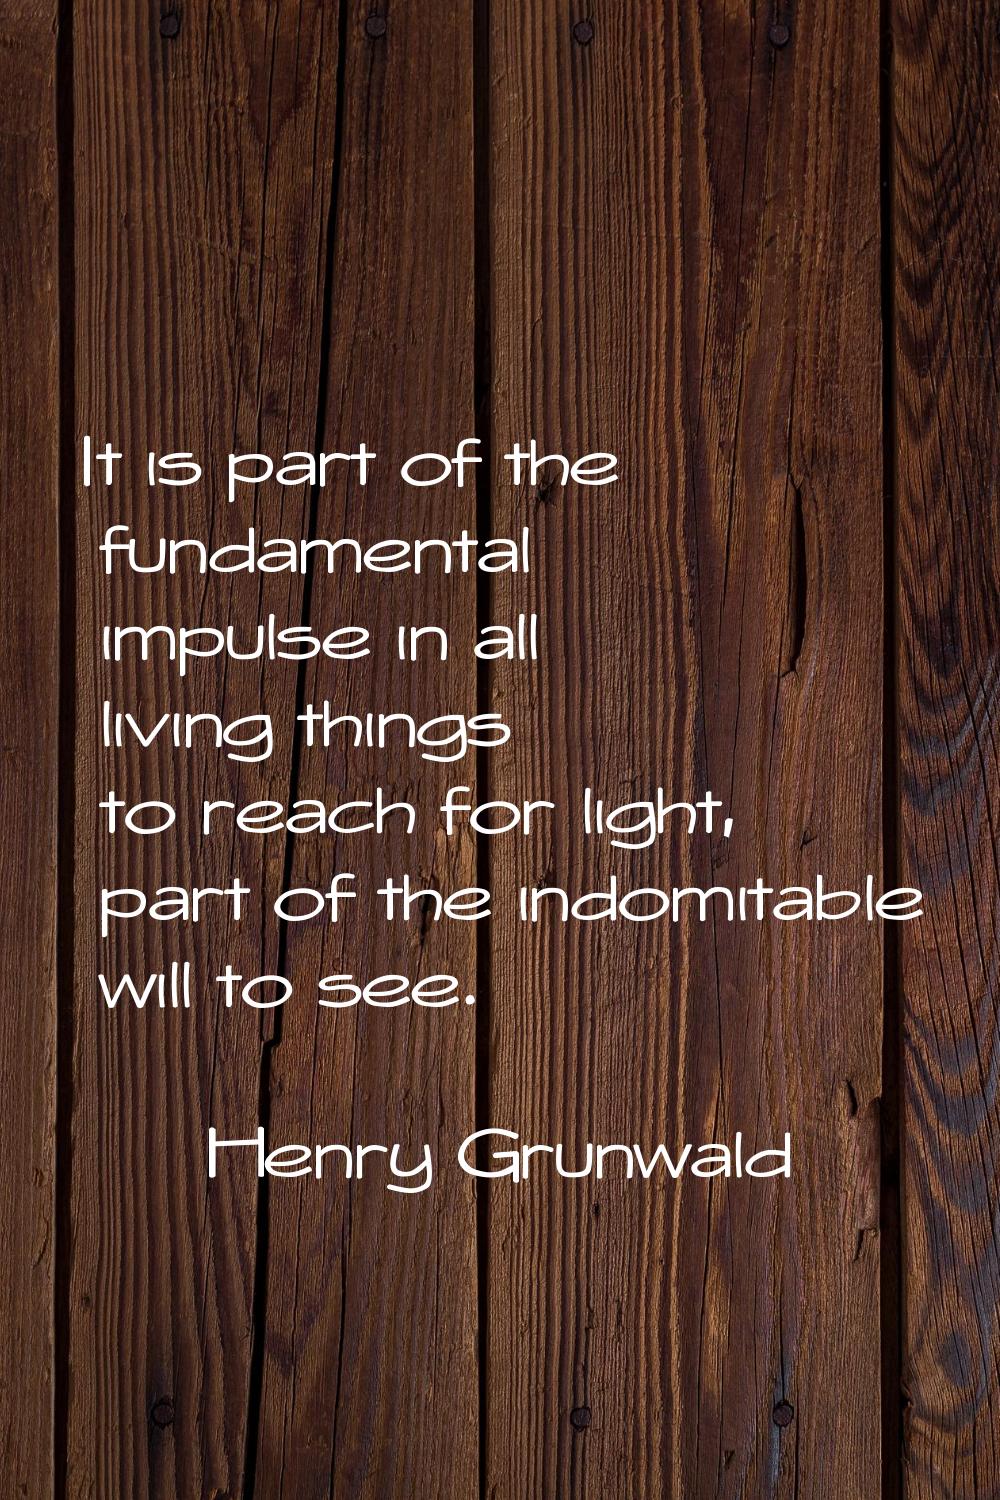 It is part of the fundamental impulse in all living things to reach for light, part of the indomita